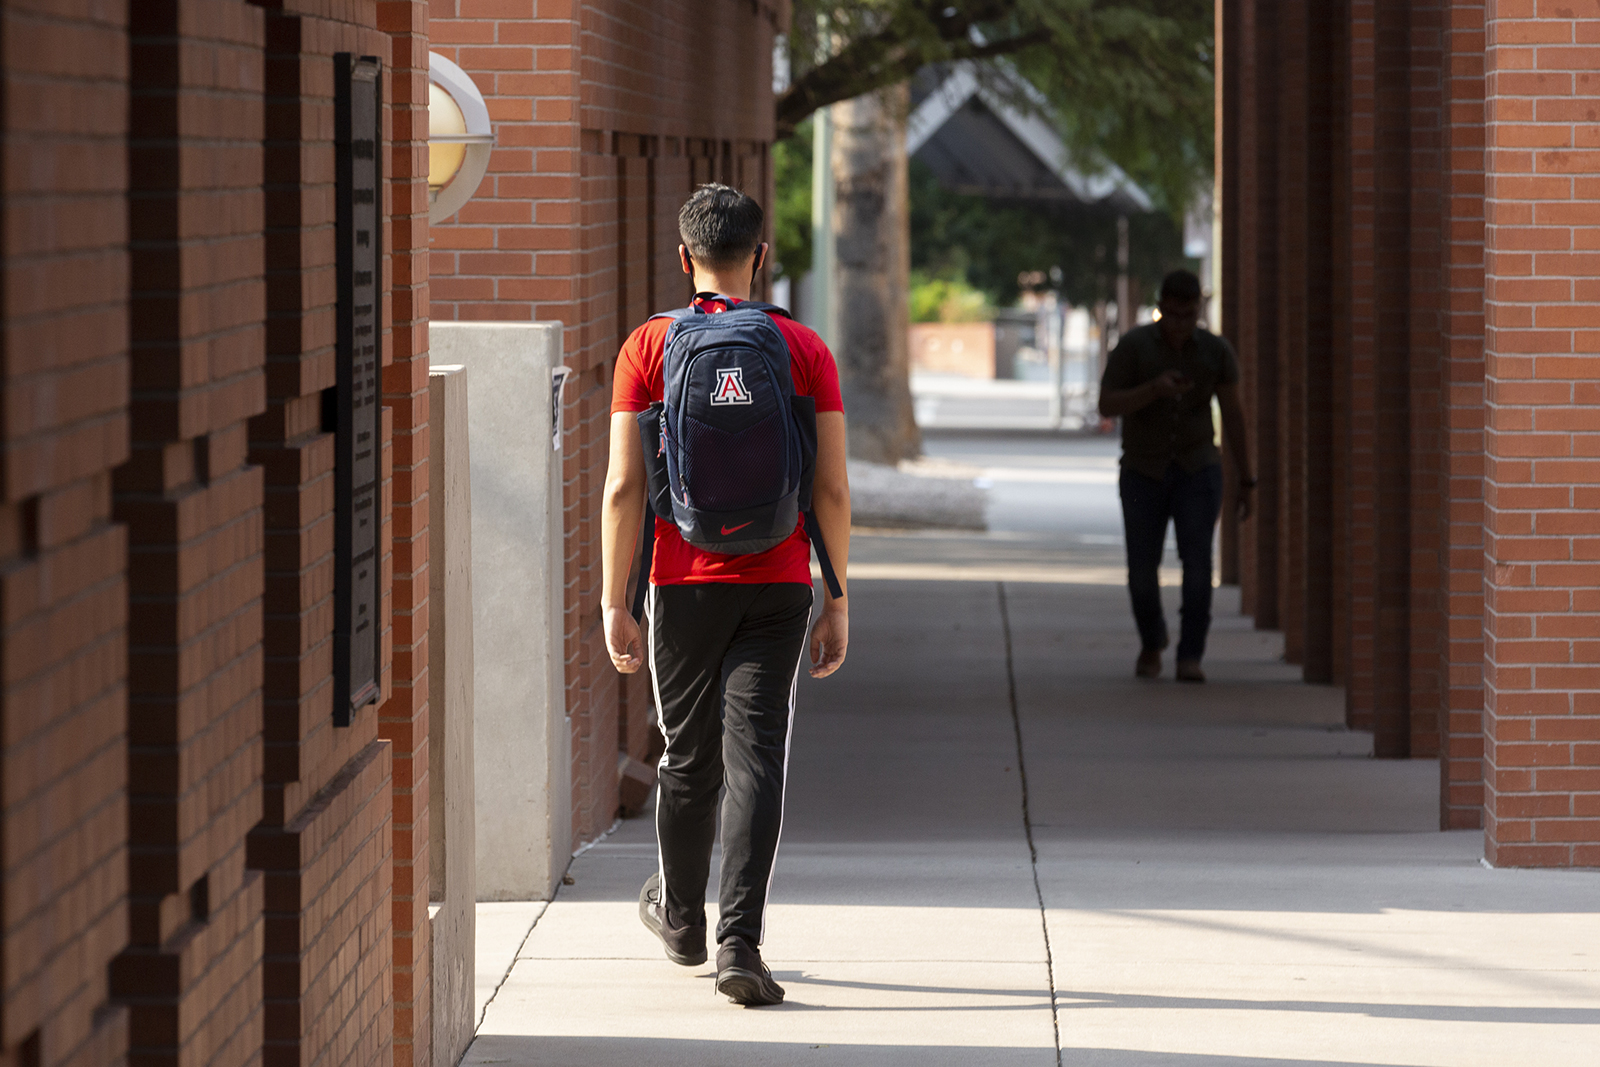 Students walk through the campus at the University of Arizona in Tucson, Arizona, on August 24.